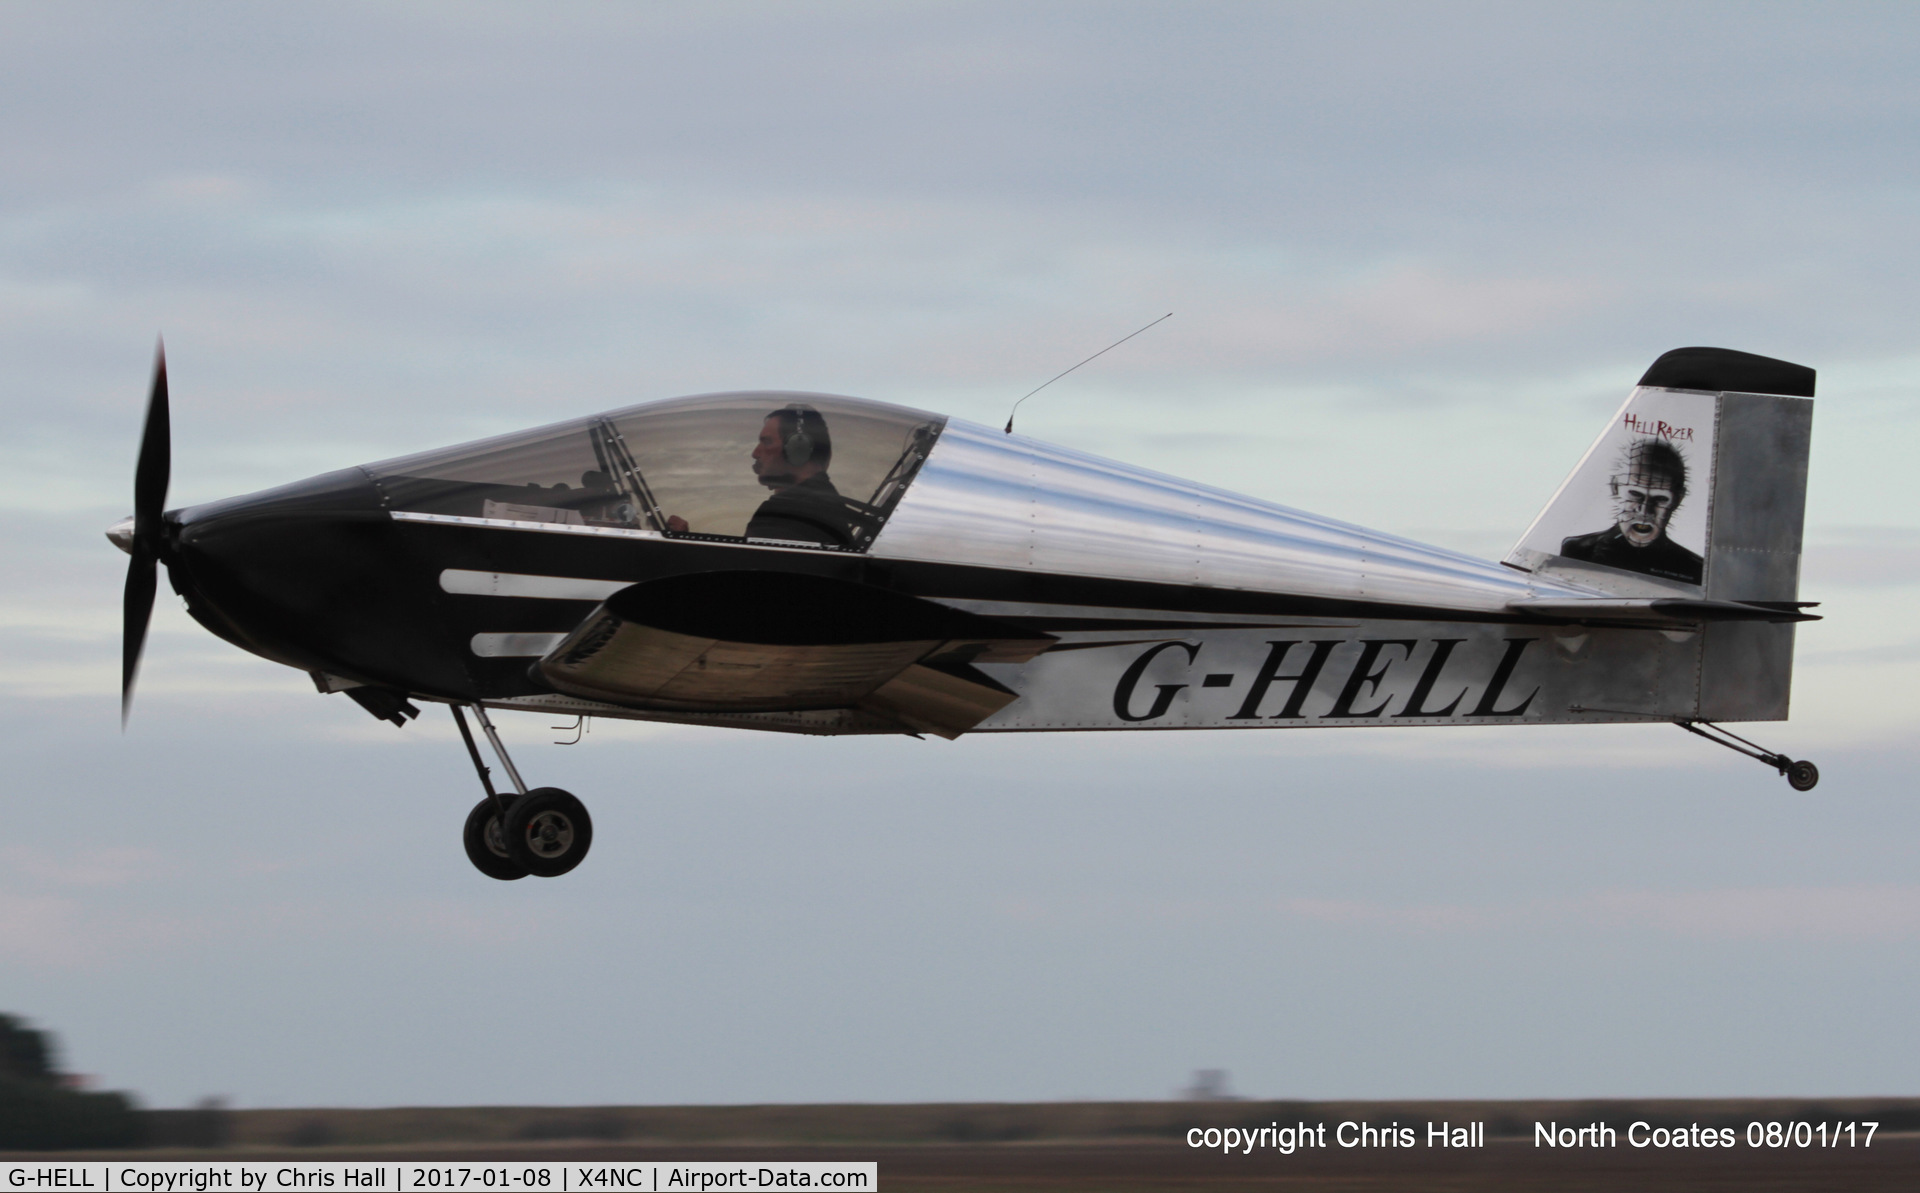 G-HELL, 2015 Sonex 3300 C/N LAA 337-15182, at the Brass Monkey fly in, North Coates